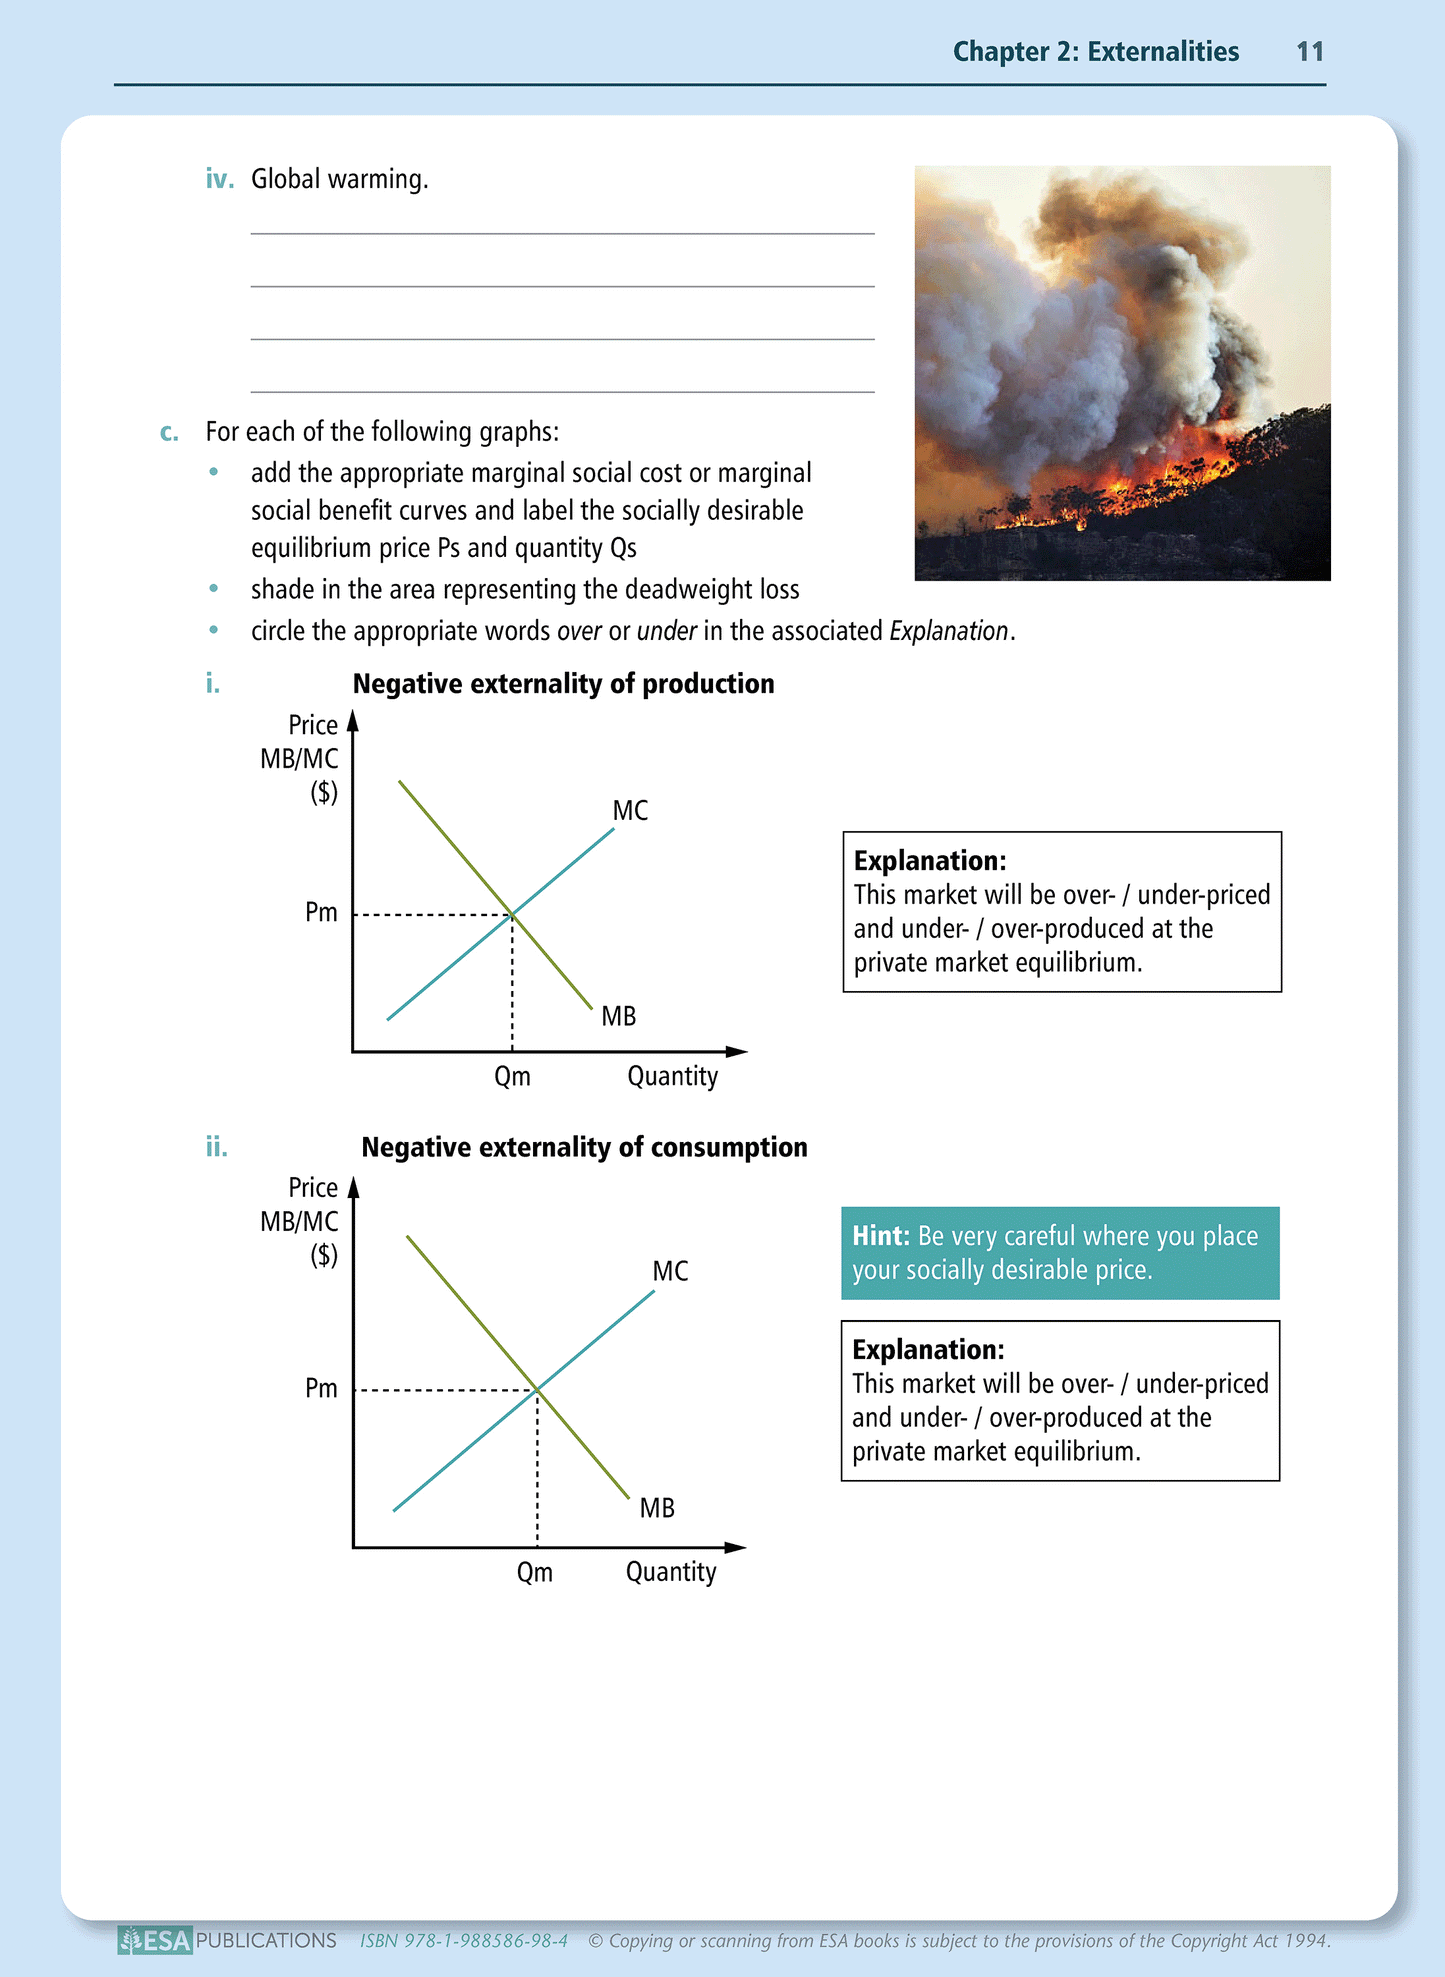 Level 3 Government Interventions to Correct Market Failures 3.4 Learning Workbook - SPECIAL (damaged stock at $5 each)